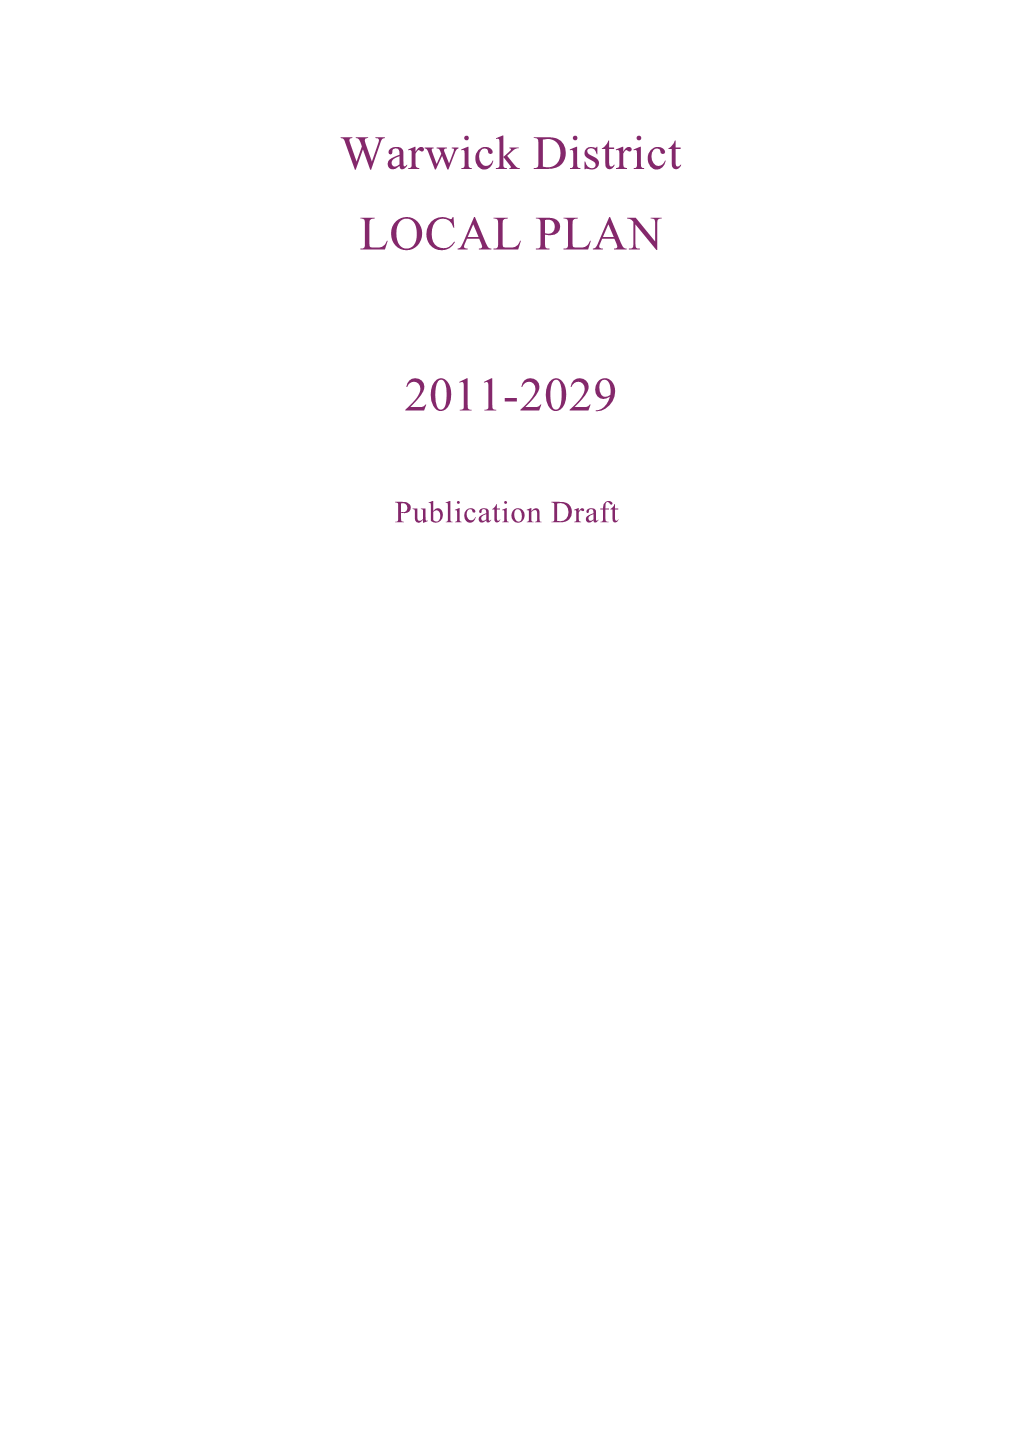 Purpose and Role of the Draft Local Plan 1